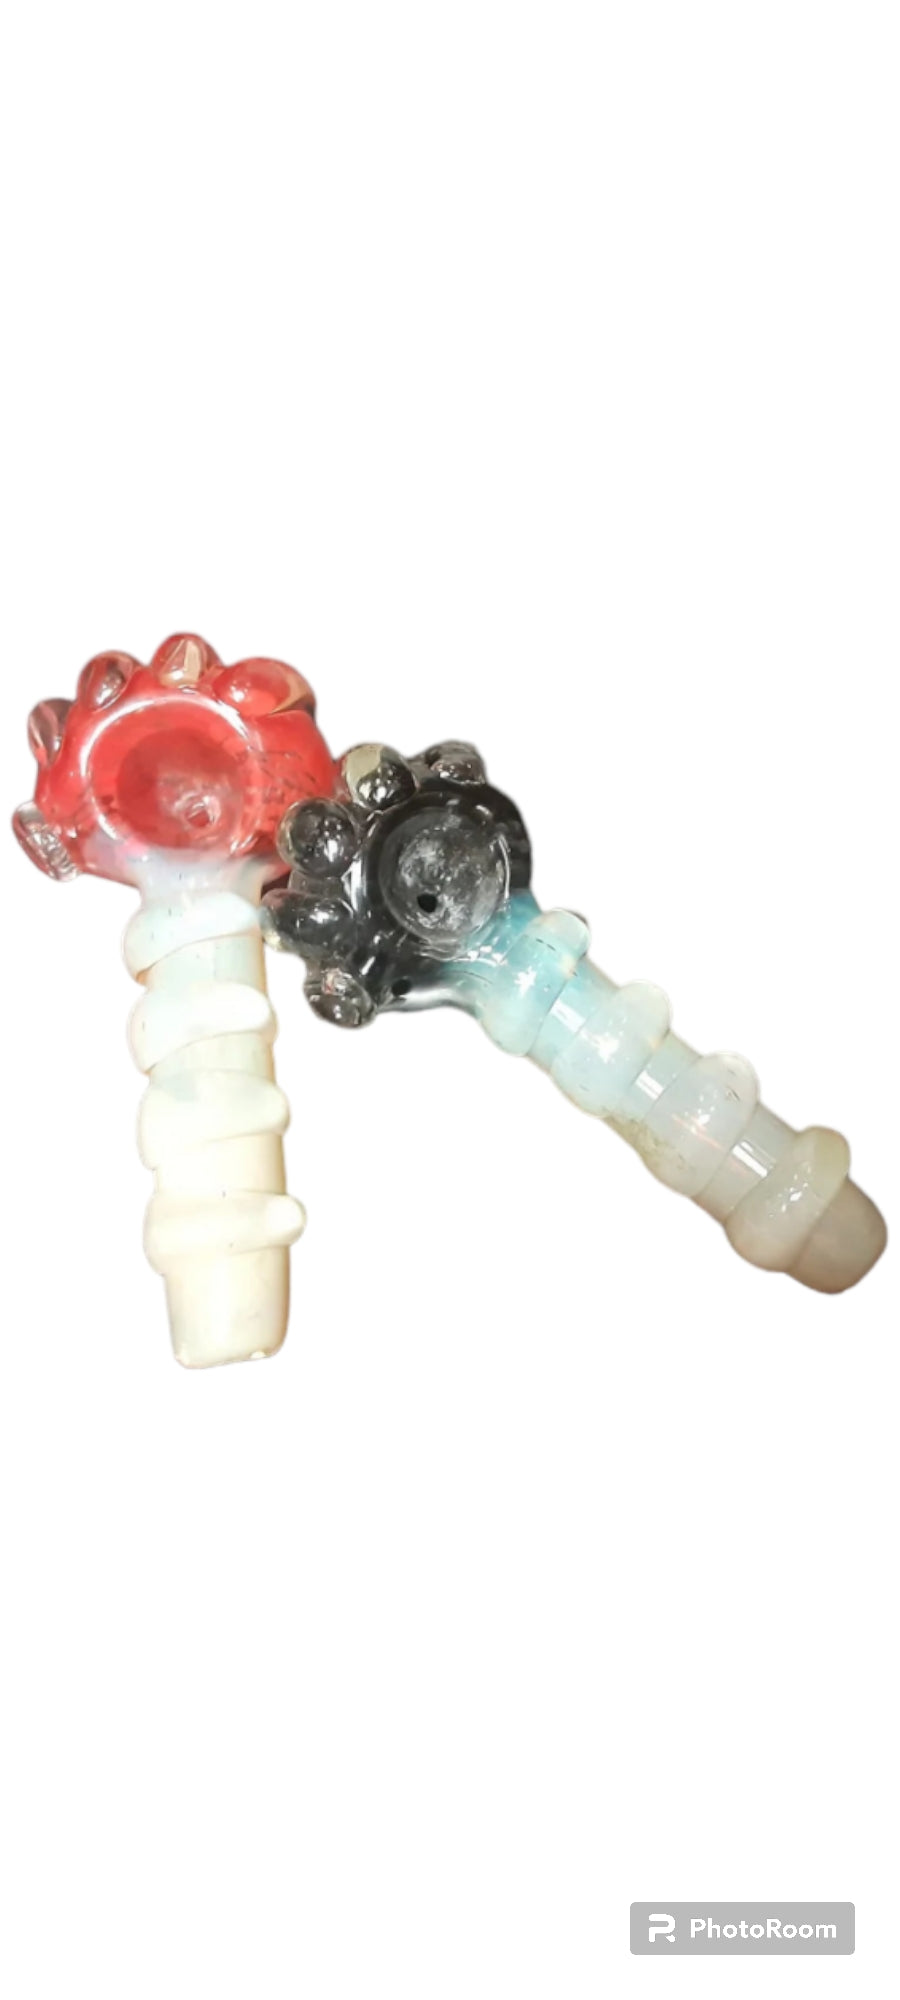 Fumed glass pipes